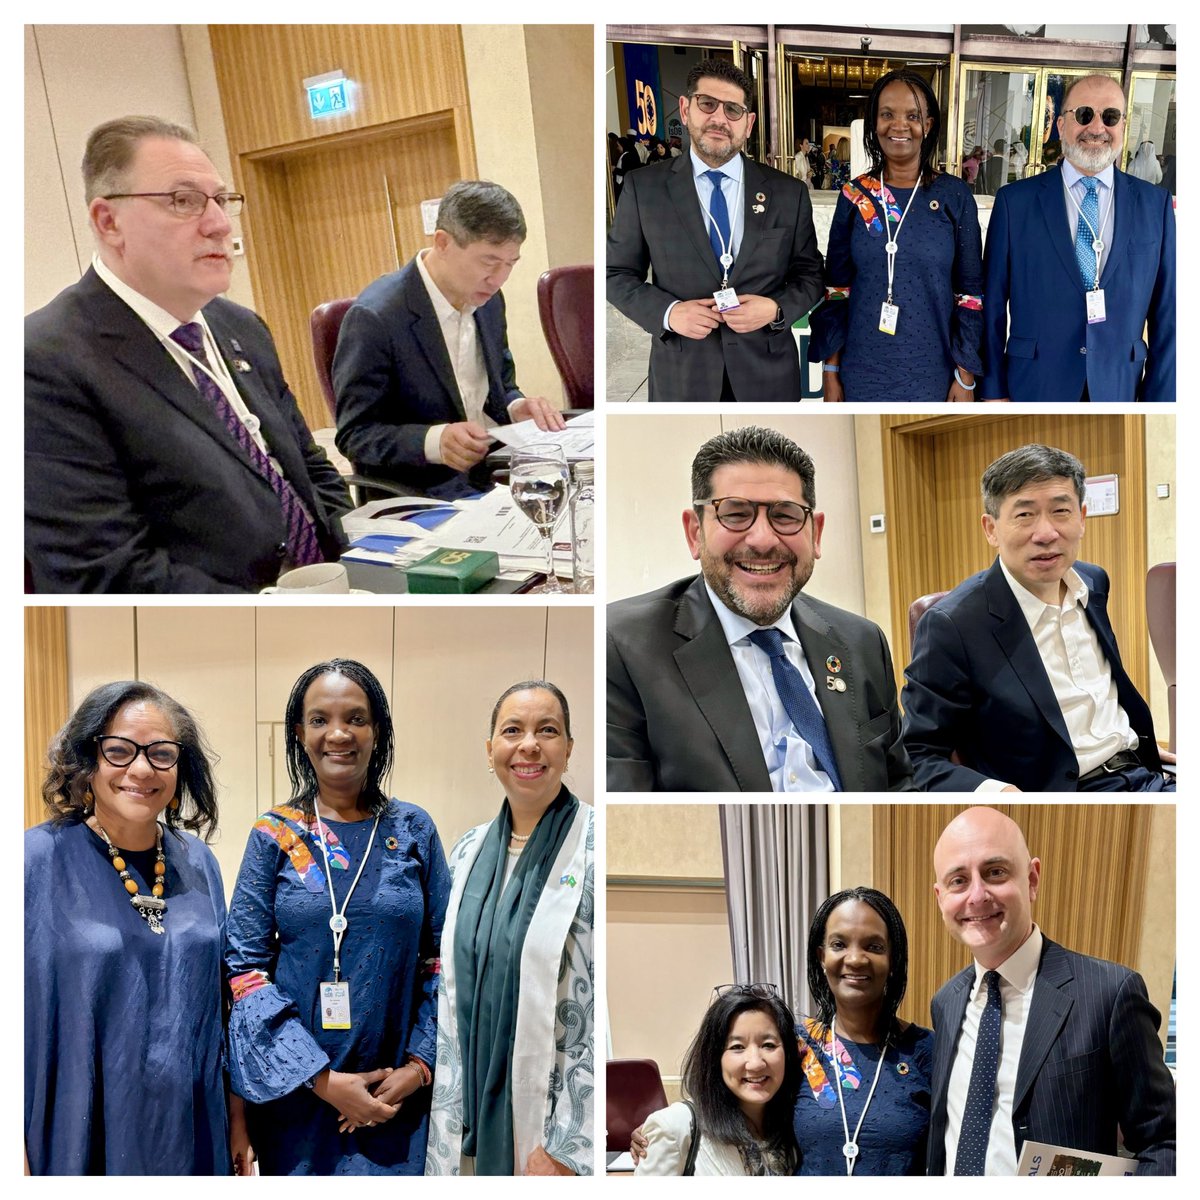 #UNDP Associate Administrator, @HaoliangXu, chaired a briefing meeting for @UNDP’s delegates at the #IsDB Annual Meeting & 50th🎂, in Riyadh🇸🇦 W/ @AbdallahAldard1, @UNDPArabStates Dir., & RRs, including Nahid Hussein🇸🇦 & @DeAissata🇨🇲, they discussed UNDP’s engaged participation.